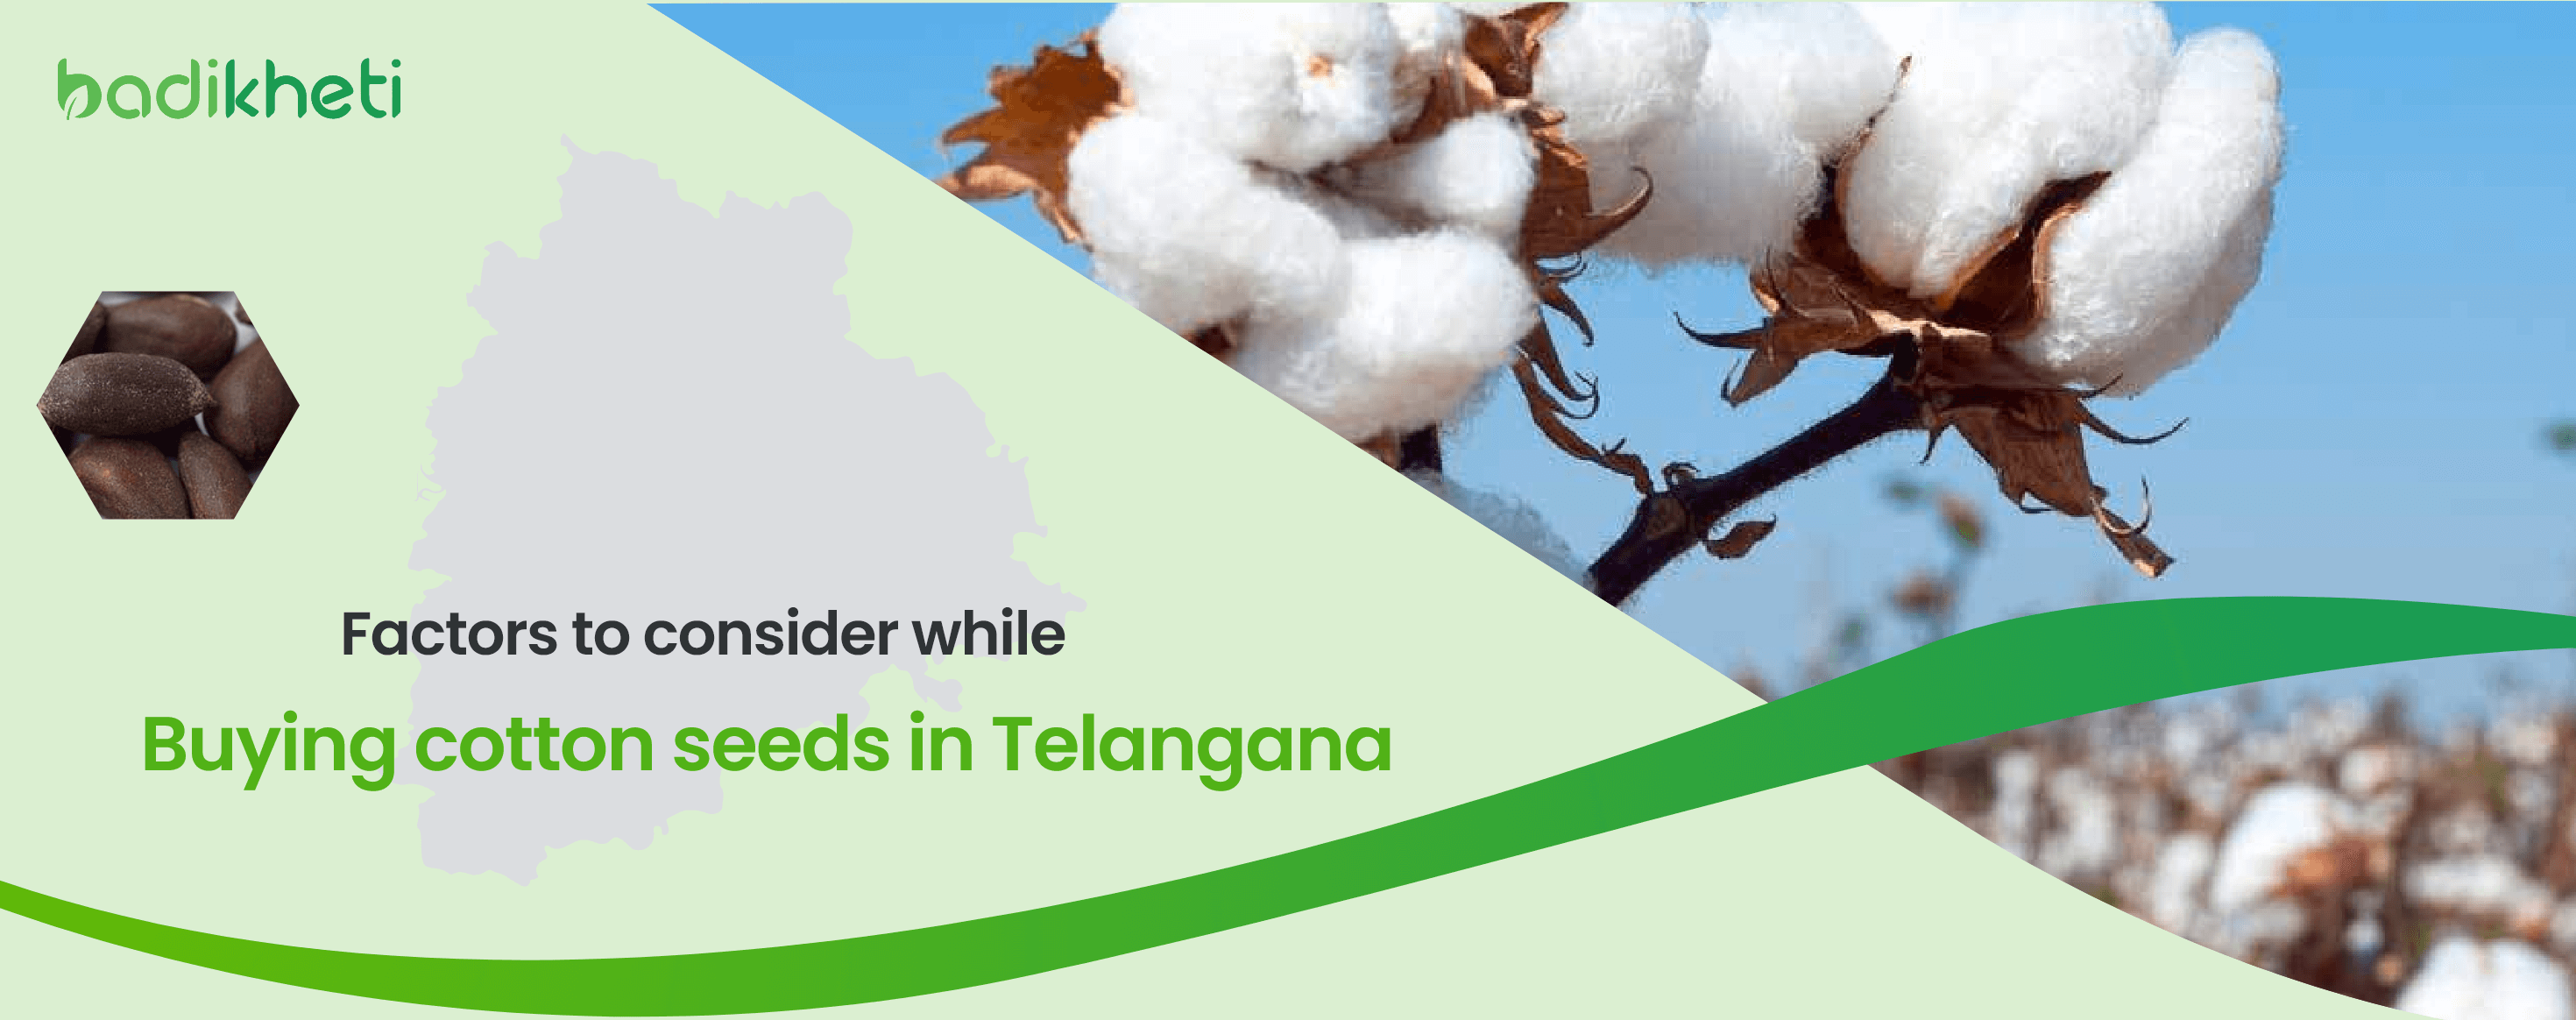 Factors to consider while buying cotton seeds on Telangana